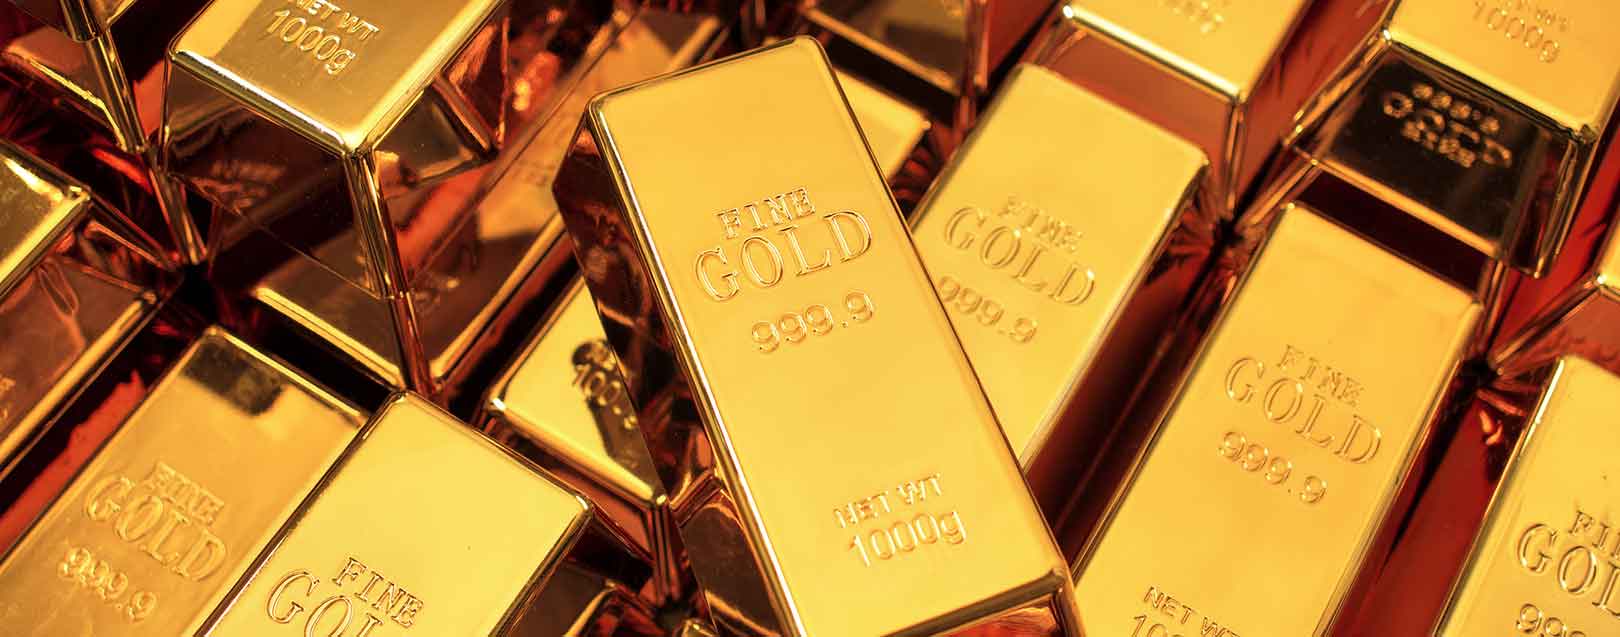 Gold imports shrink nearly 8% in 2015-16